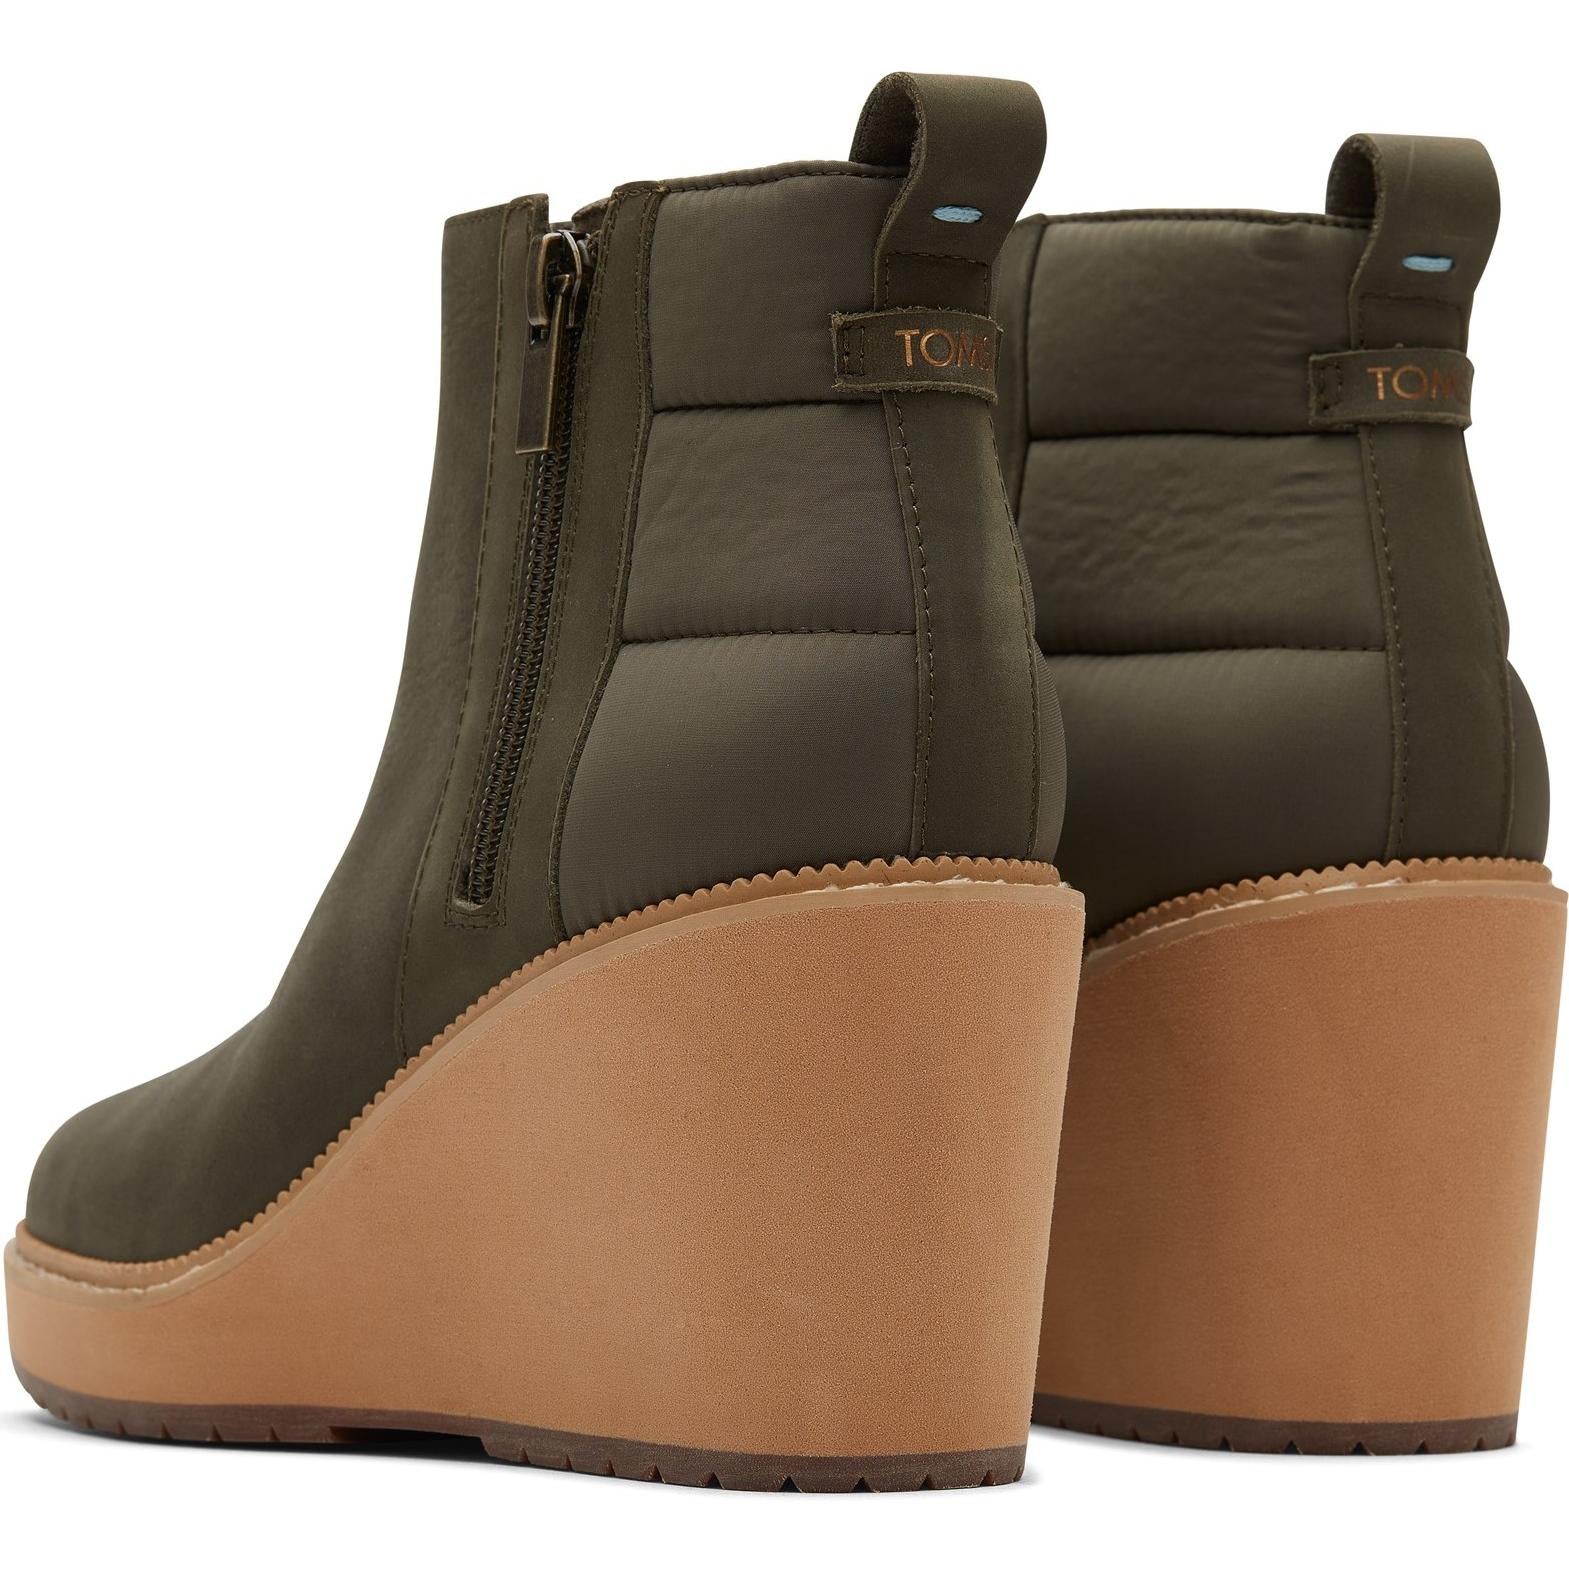 Toms Raven Boot